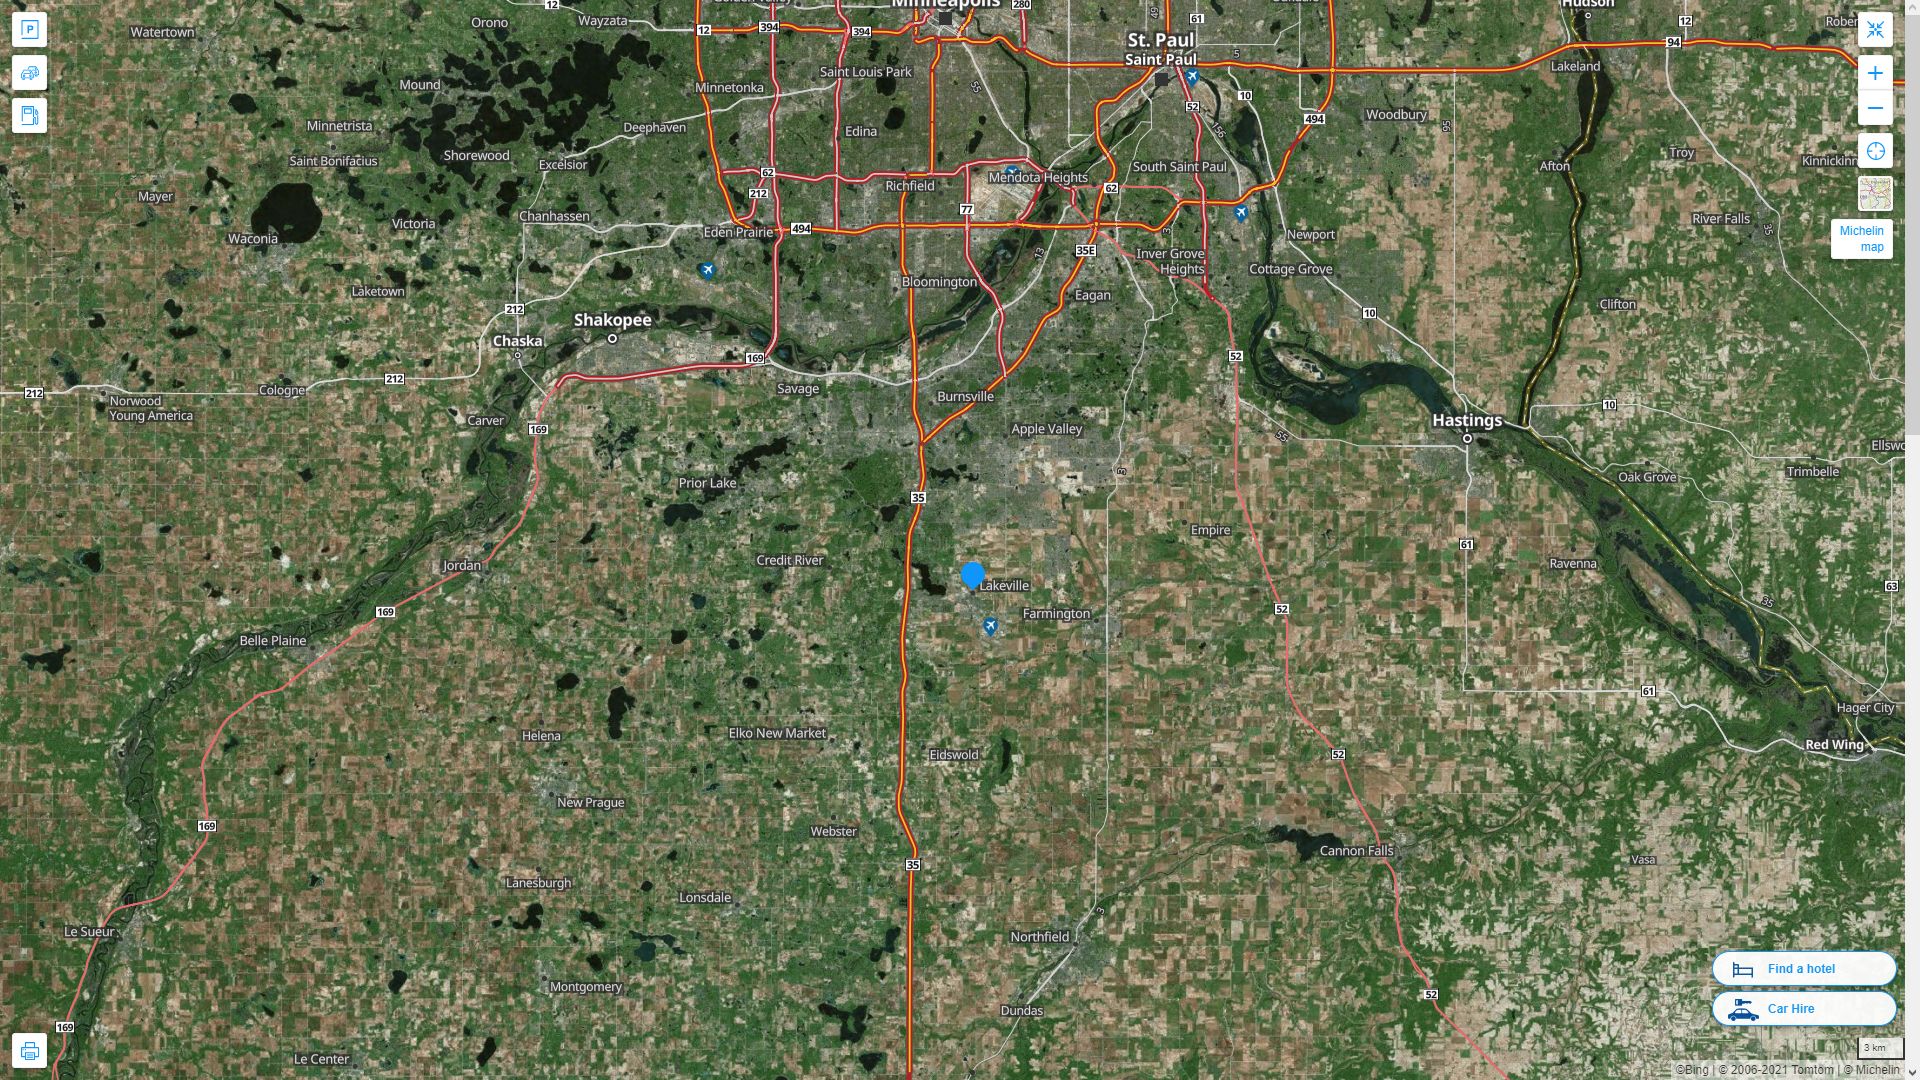 Lakeville Minnesota Highway and Road Map with Satellite View